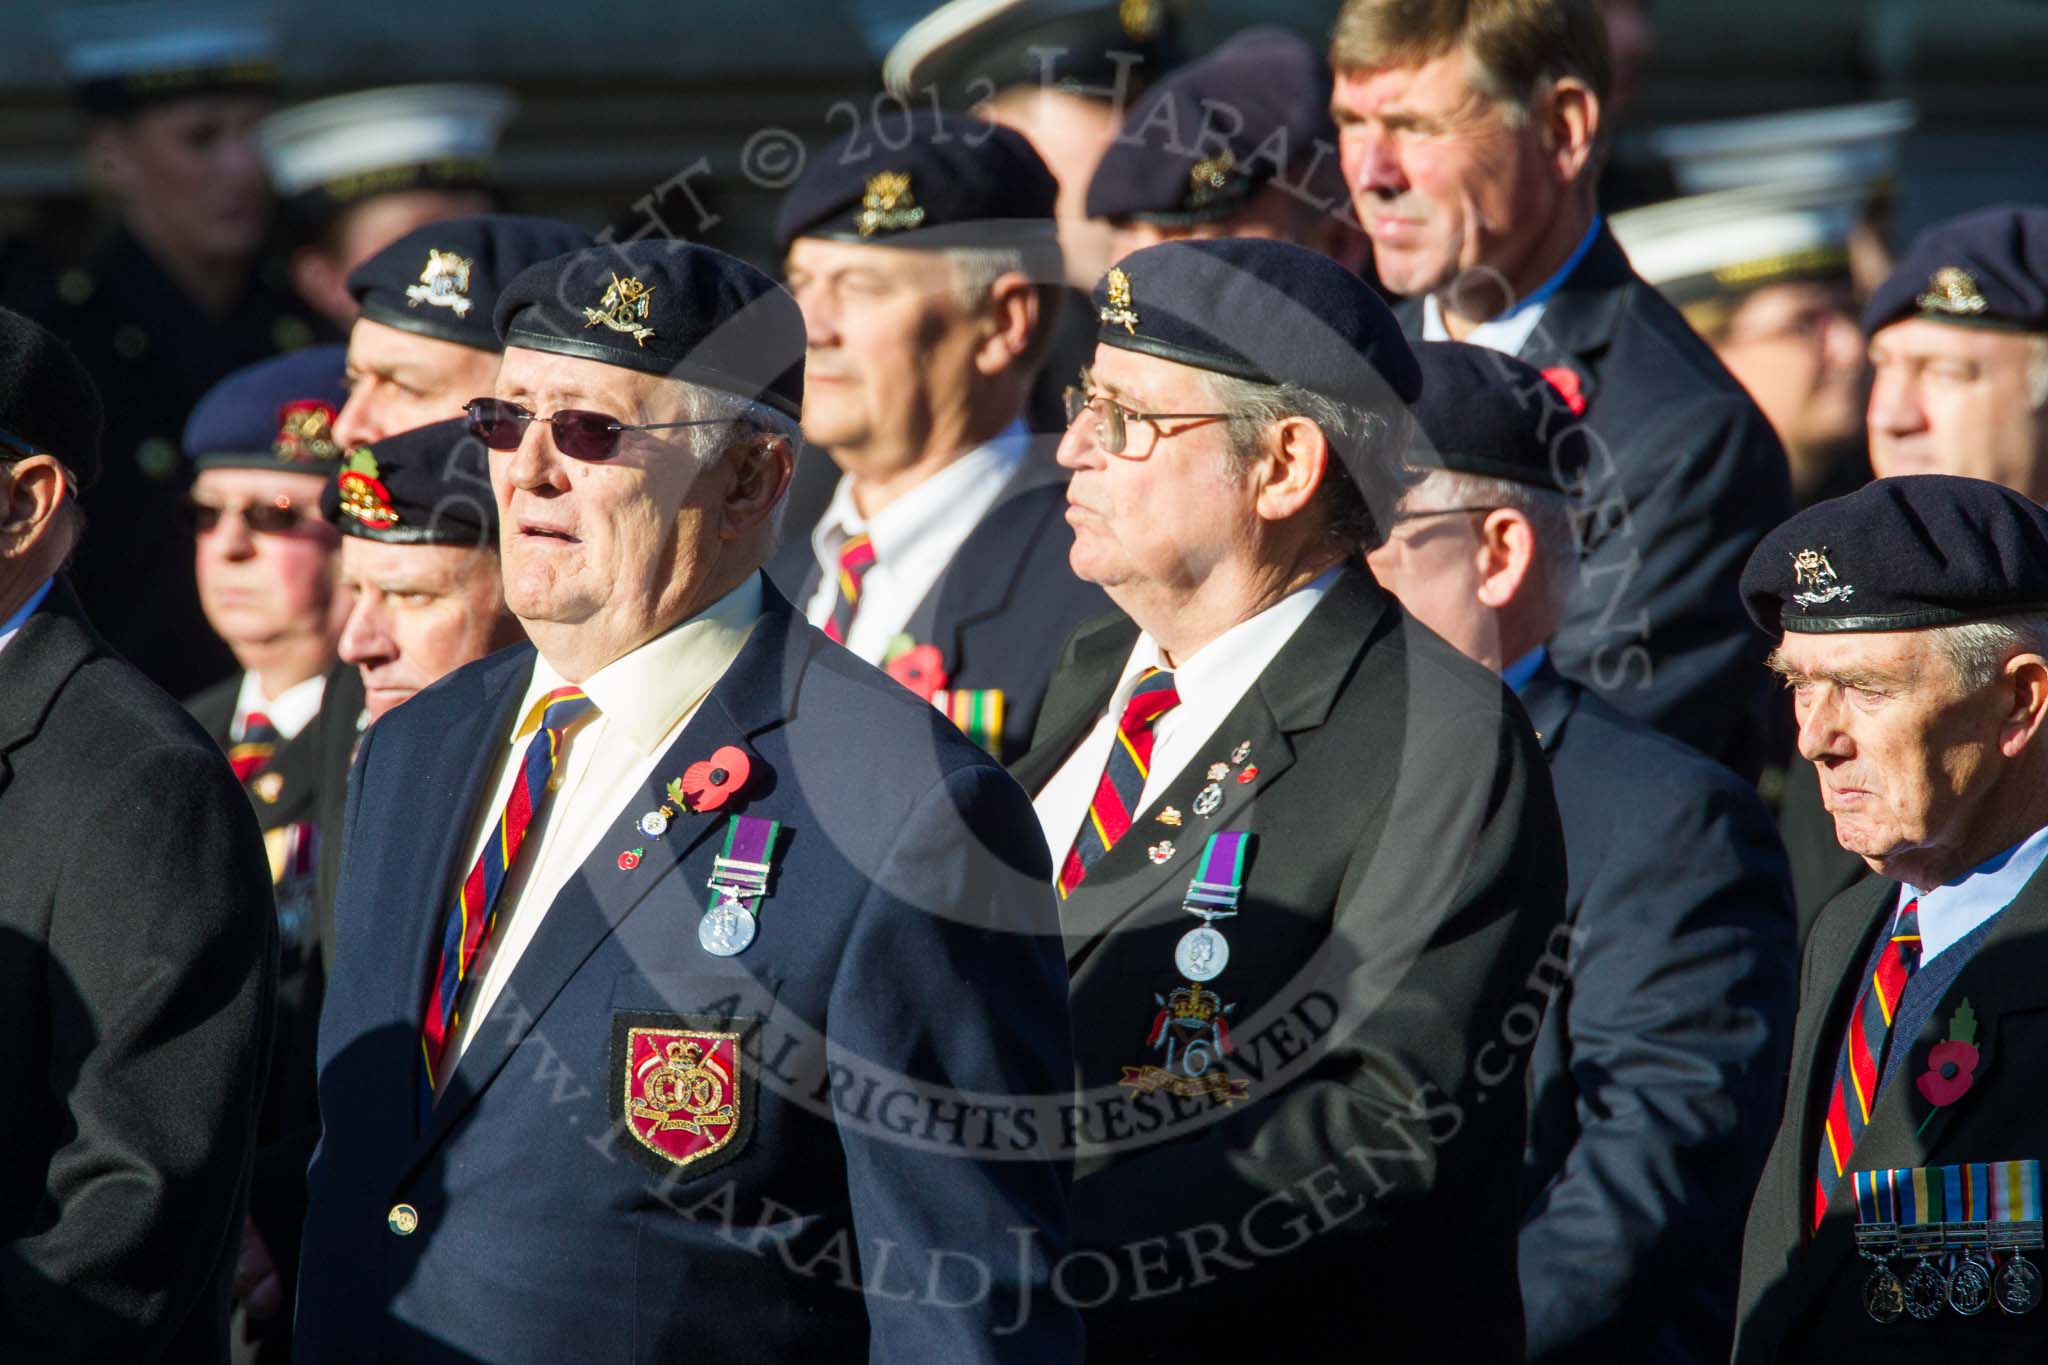 Remembrance Sunday at the Cenotaph in London 2014: Group B30 - 16/5th Queen's Royal Lancers.
Press stand opposite the Foreign Office building, Whitehall, London SW1,
London,
Greater London,
United Kingdom,
on 09 November 2014 at 12:13, image #1896